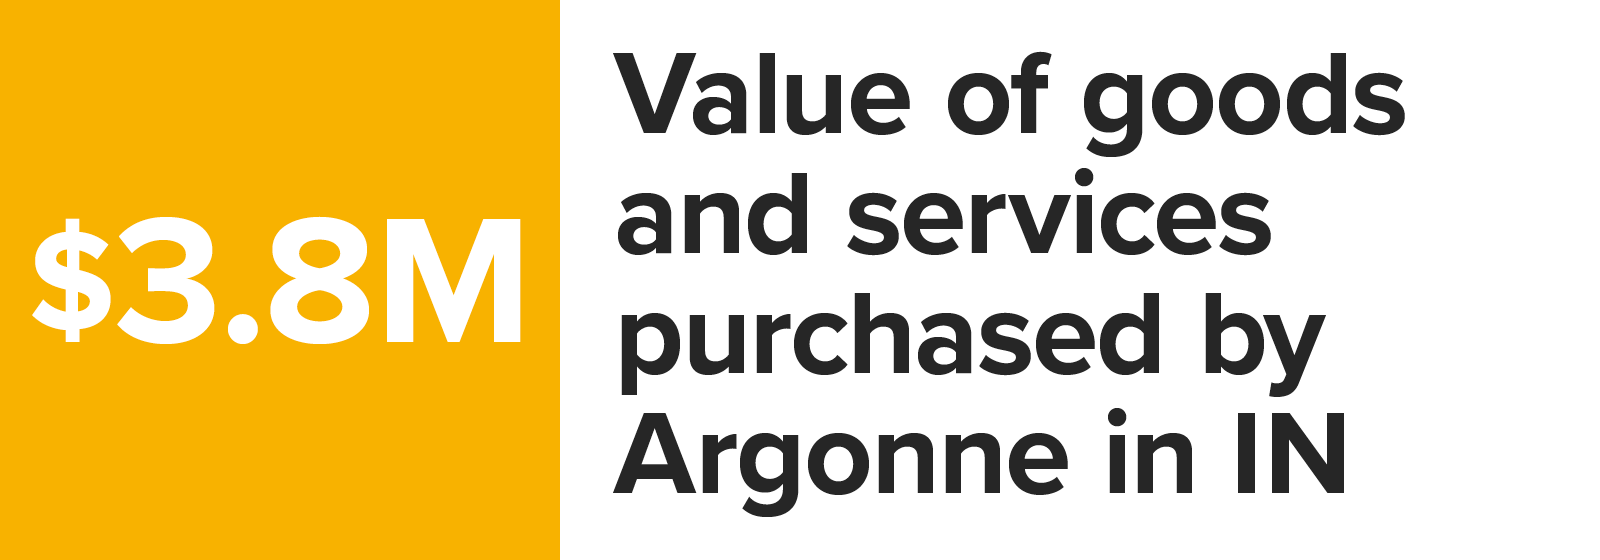 Number graphic value of goods and services purchased by Argonne in Indiana